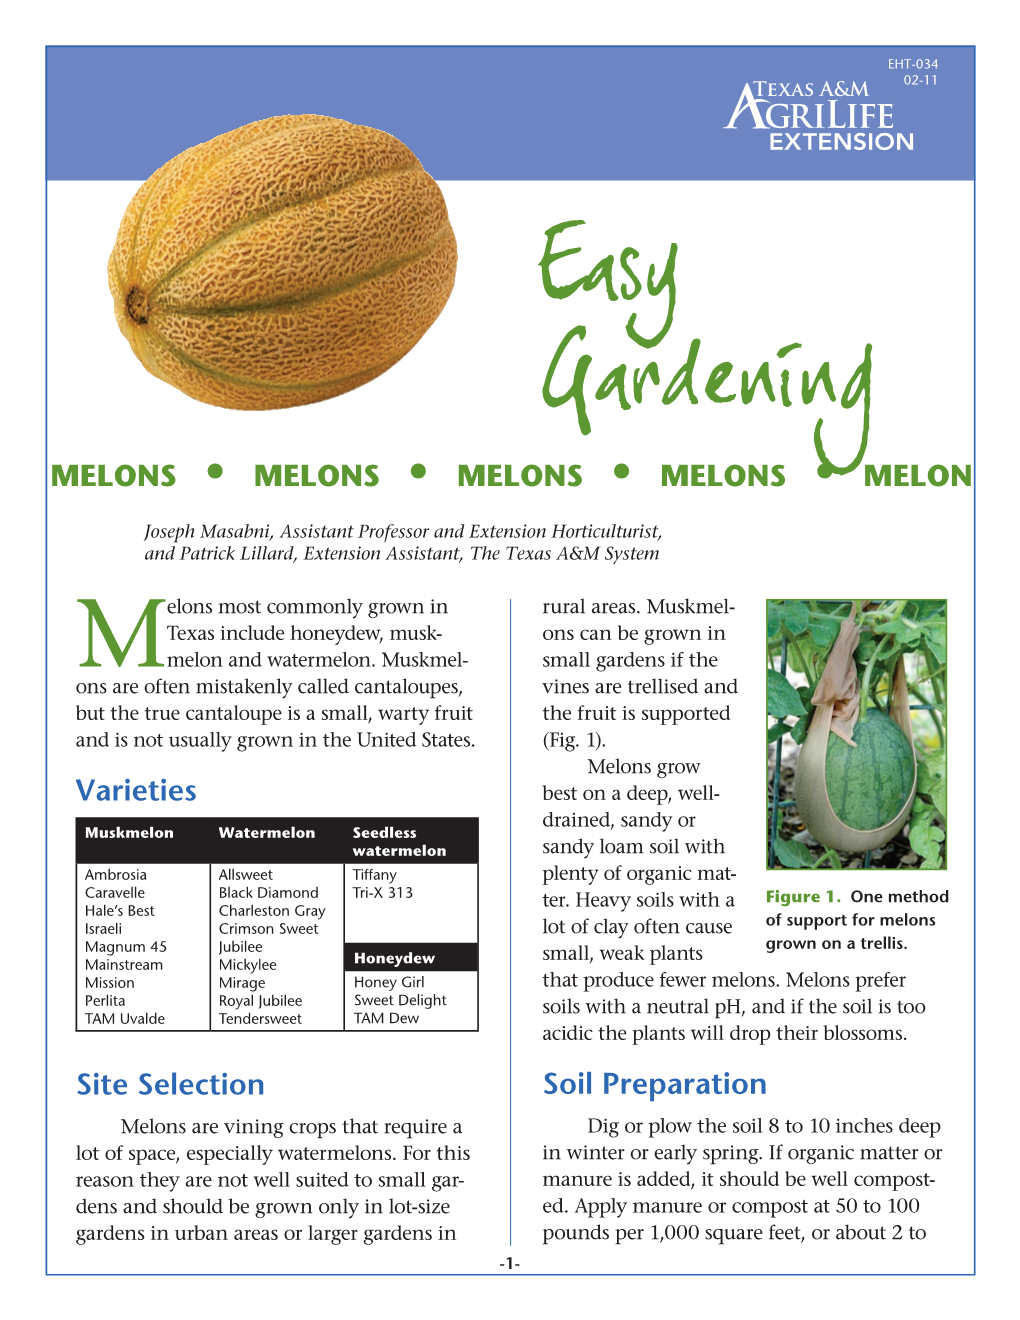 Honeydew Melons When the Skin Begins to Turn Yellow and the End of the Fruit Opposite the Stem (Blossom End) Be- Gins to Soften